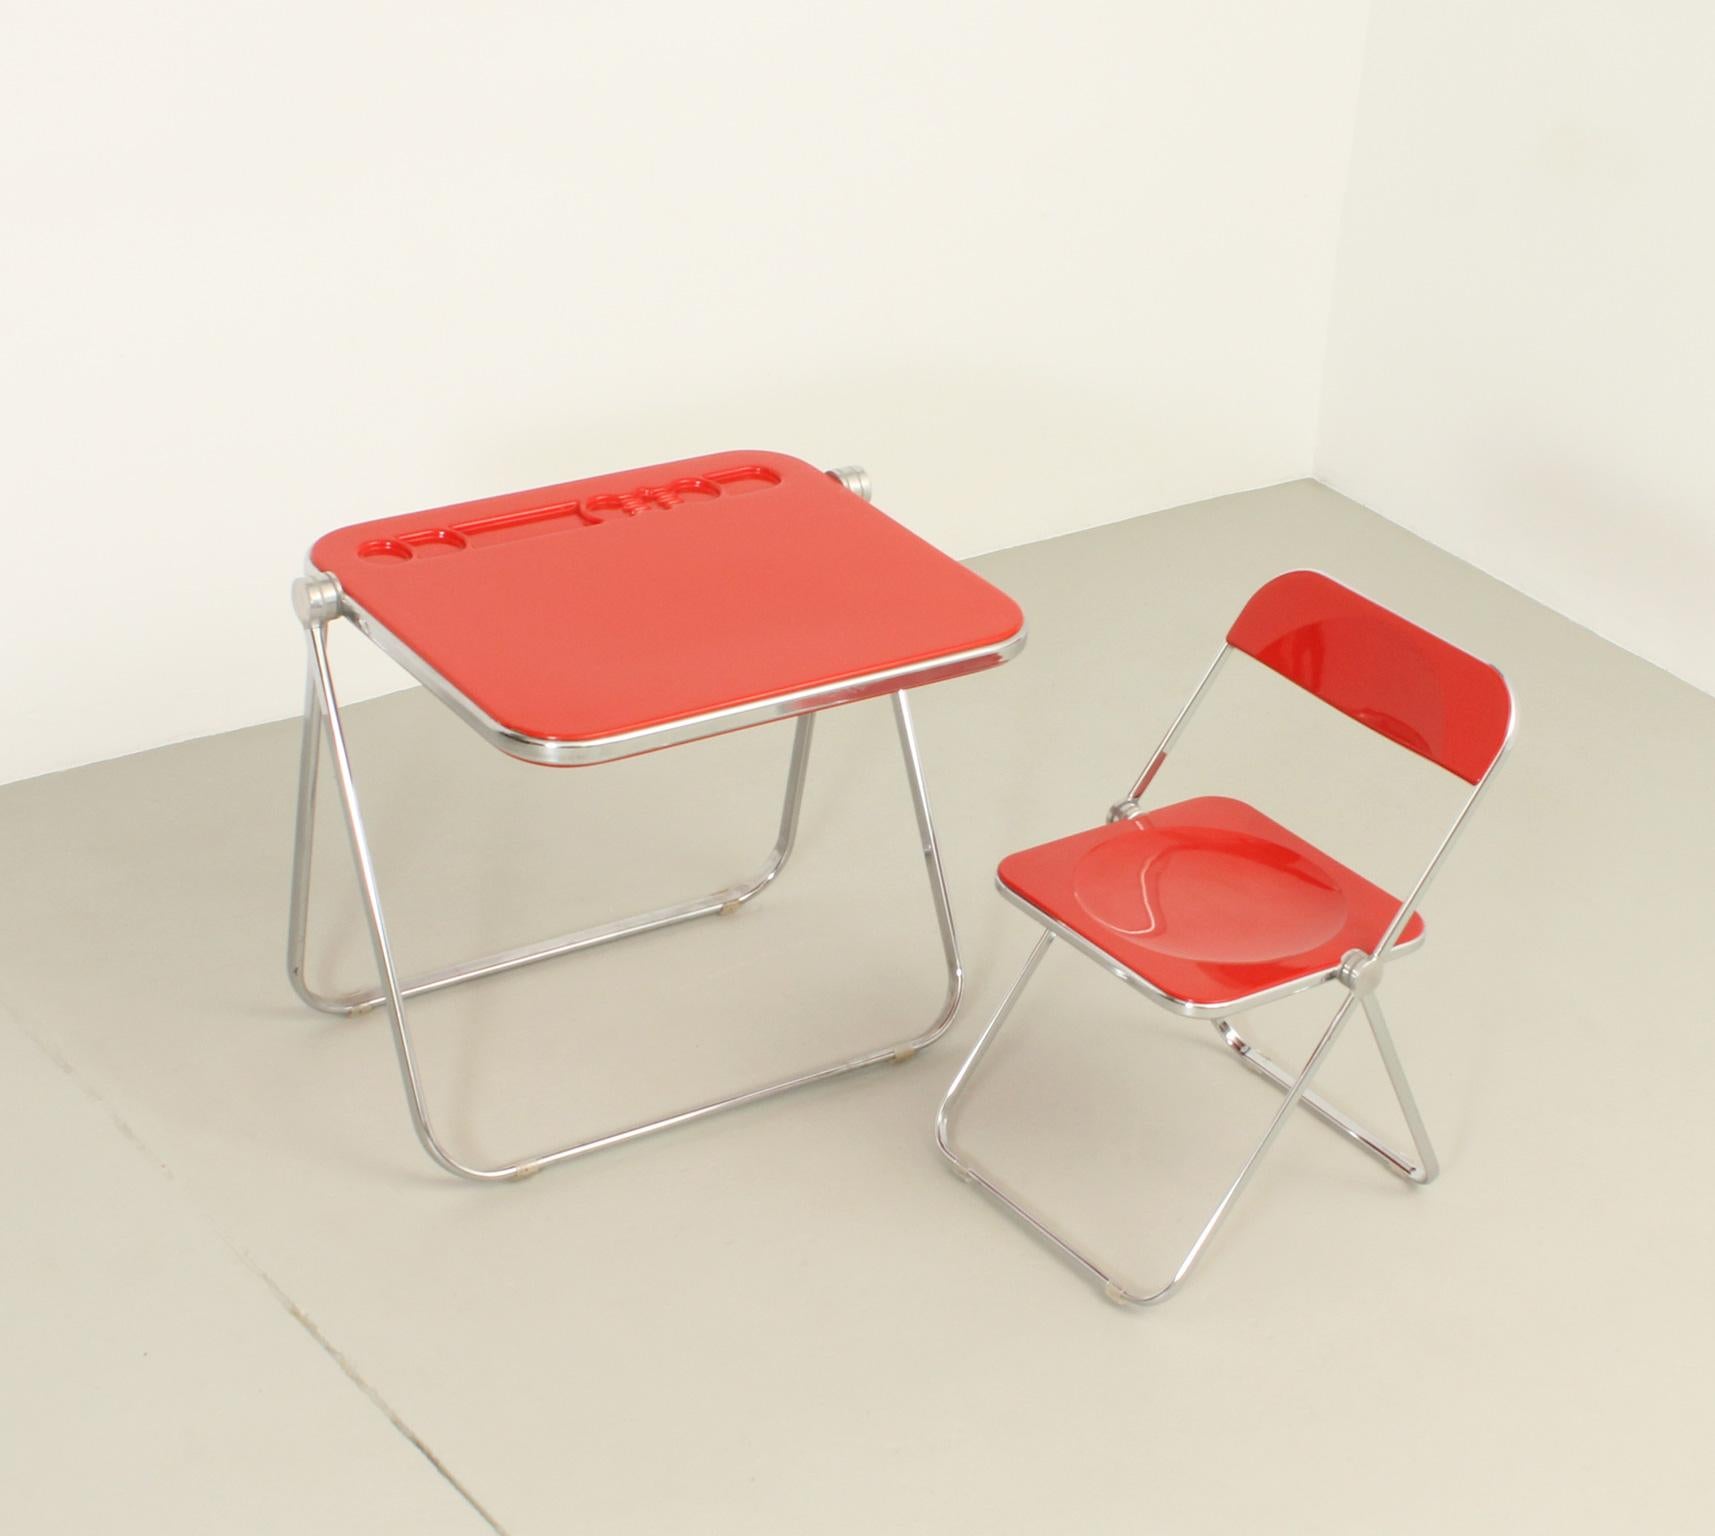 Platone folding desk and Plia chair designed in 1971 and 1969 by Giancarlo Piretti for Anonima Castelli, Italy. Articulated structure in chrome steel with red ABS molded plastic. Early edition with paper label.